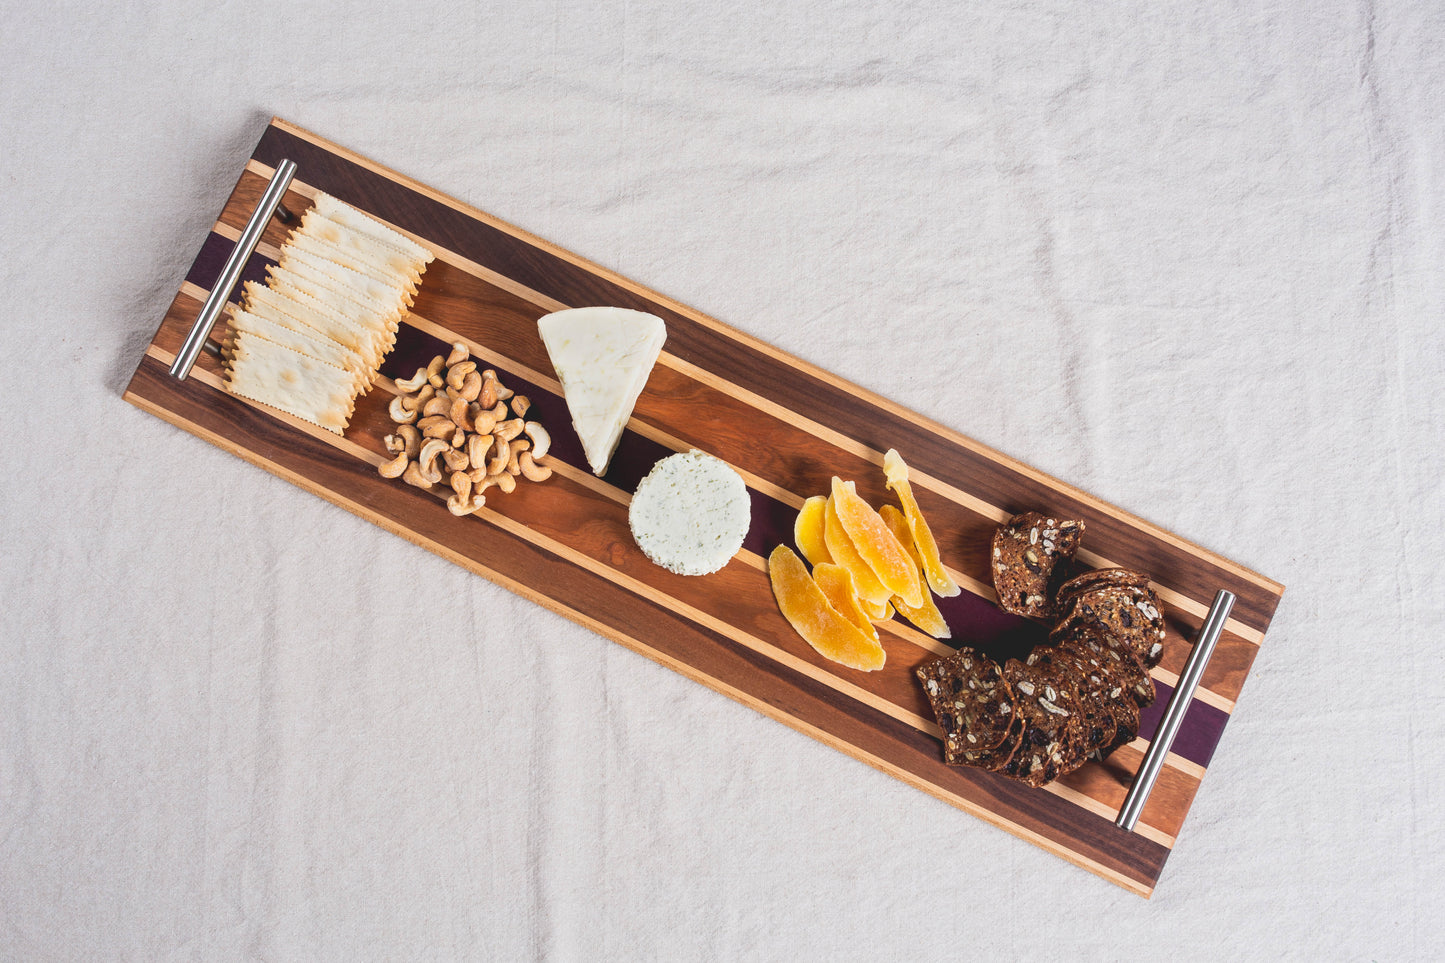 Extra Large Charcuterie Board with Stainless Steel Handles, Maple, Alder, Purple Heart